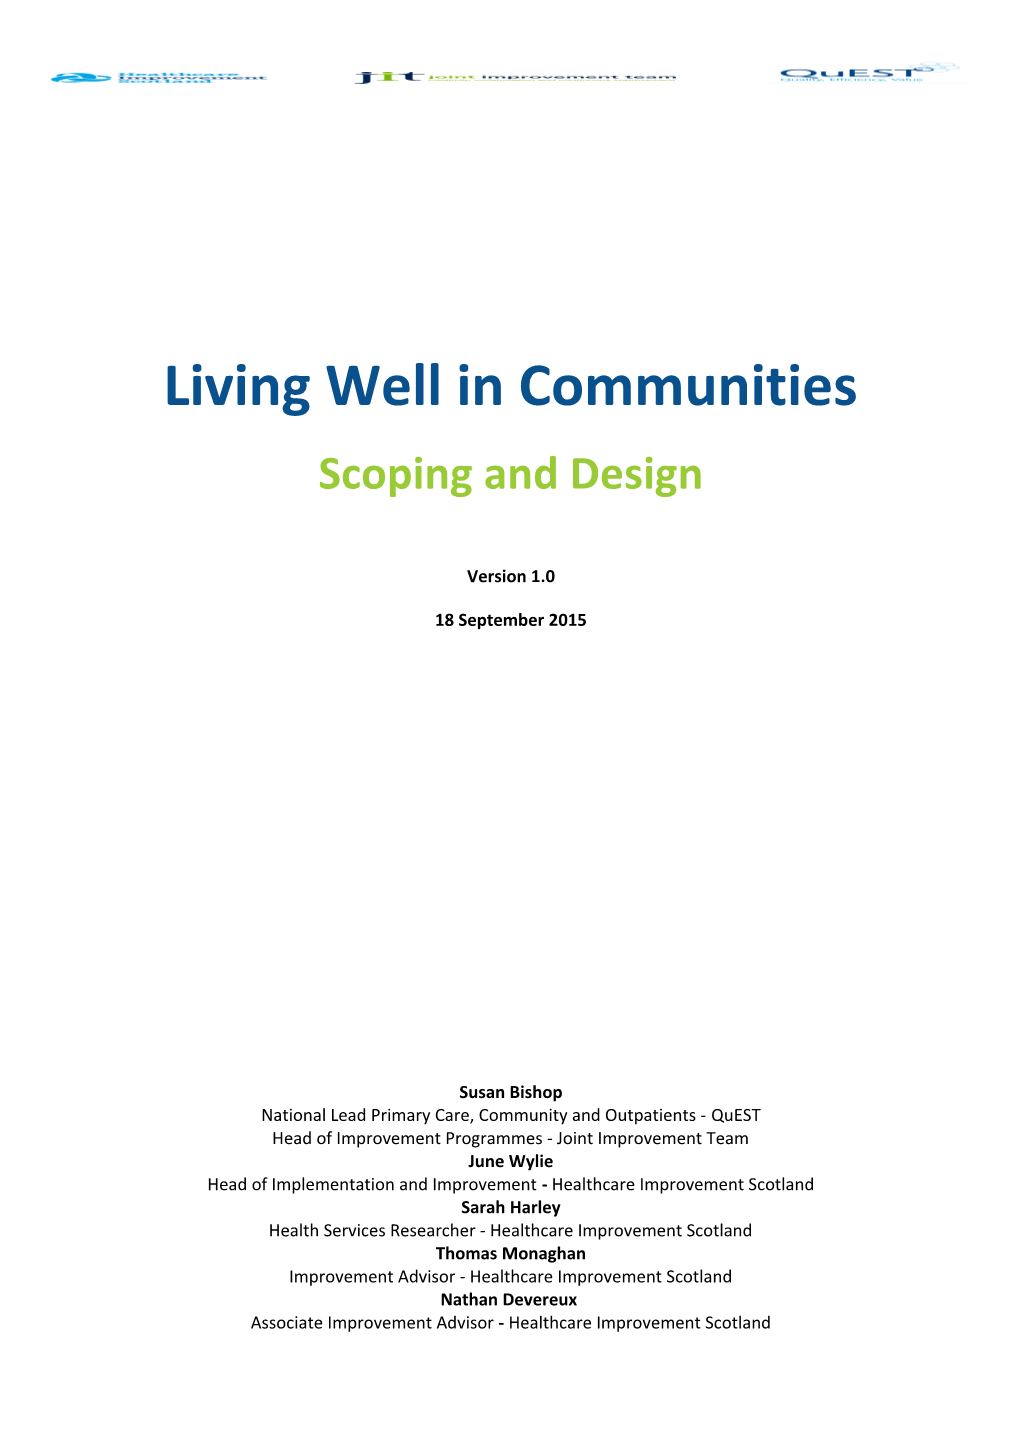 Living Well in Communities: Scoping and Design V1.0